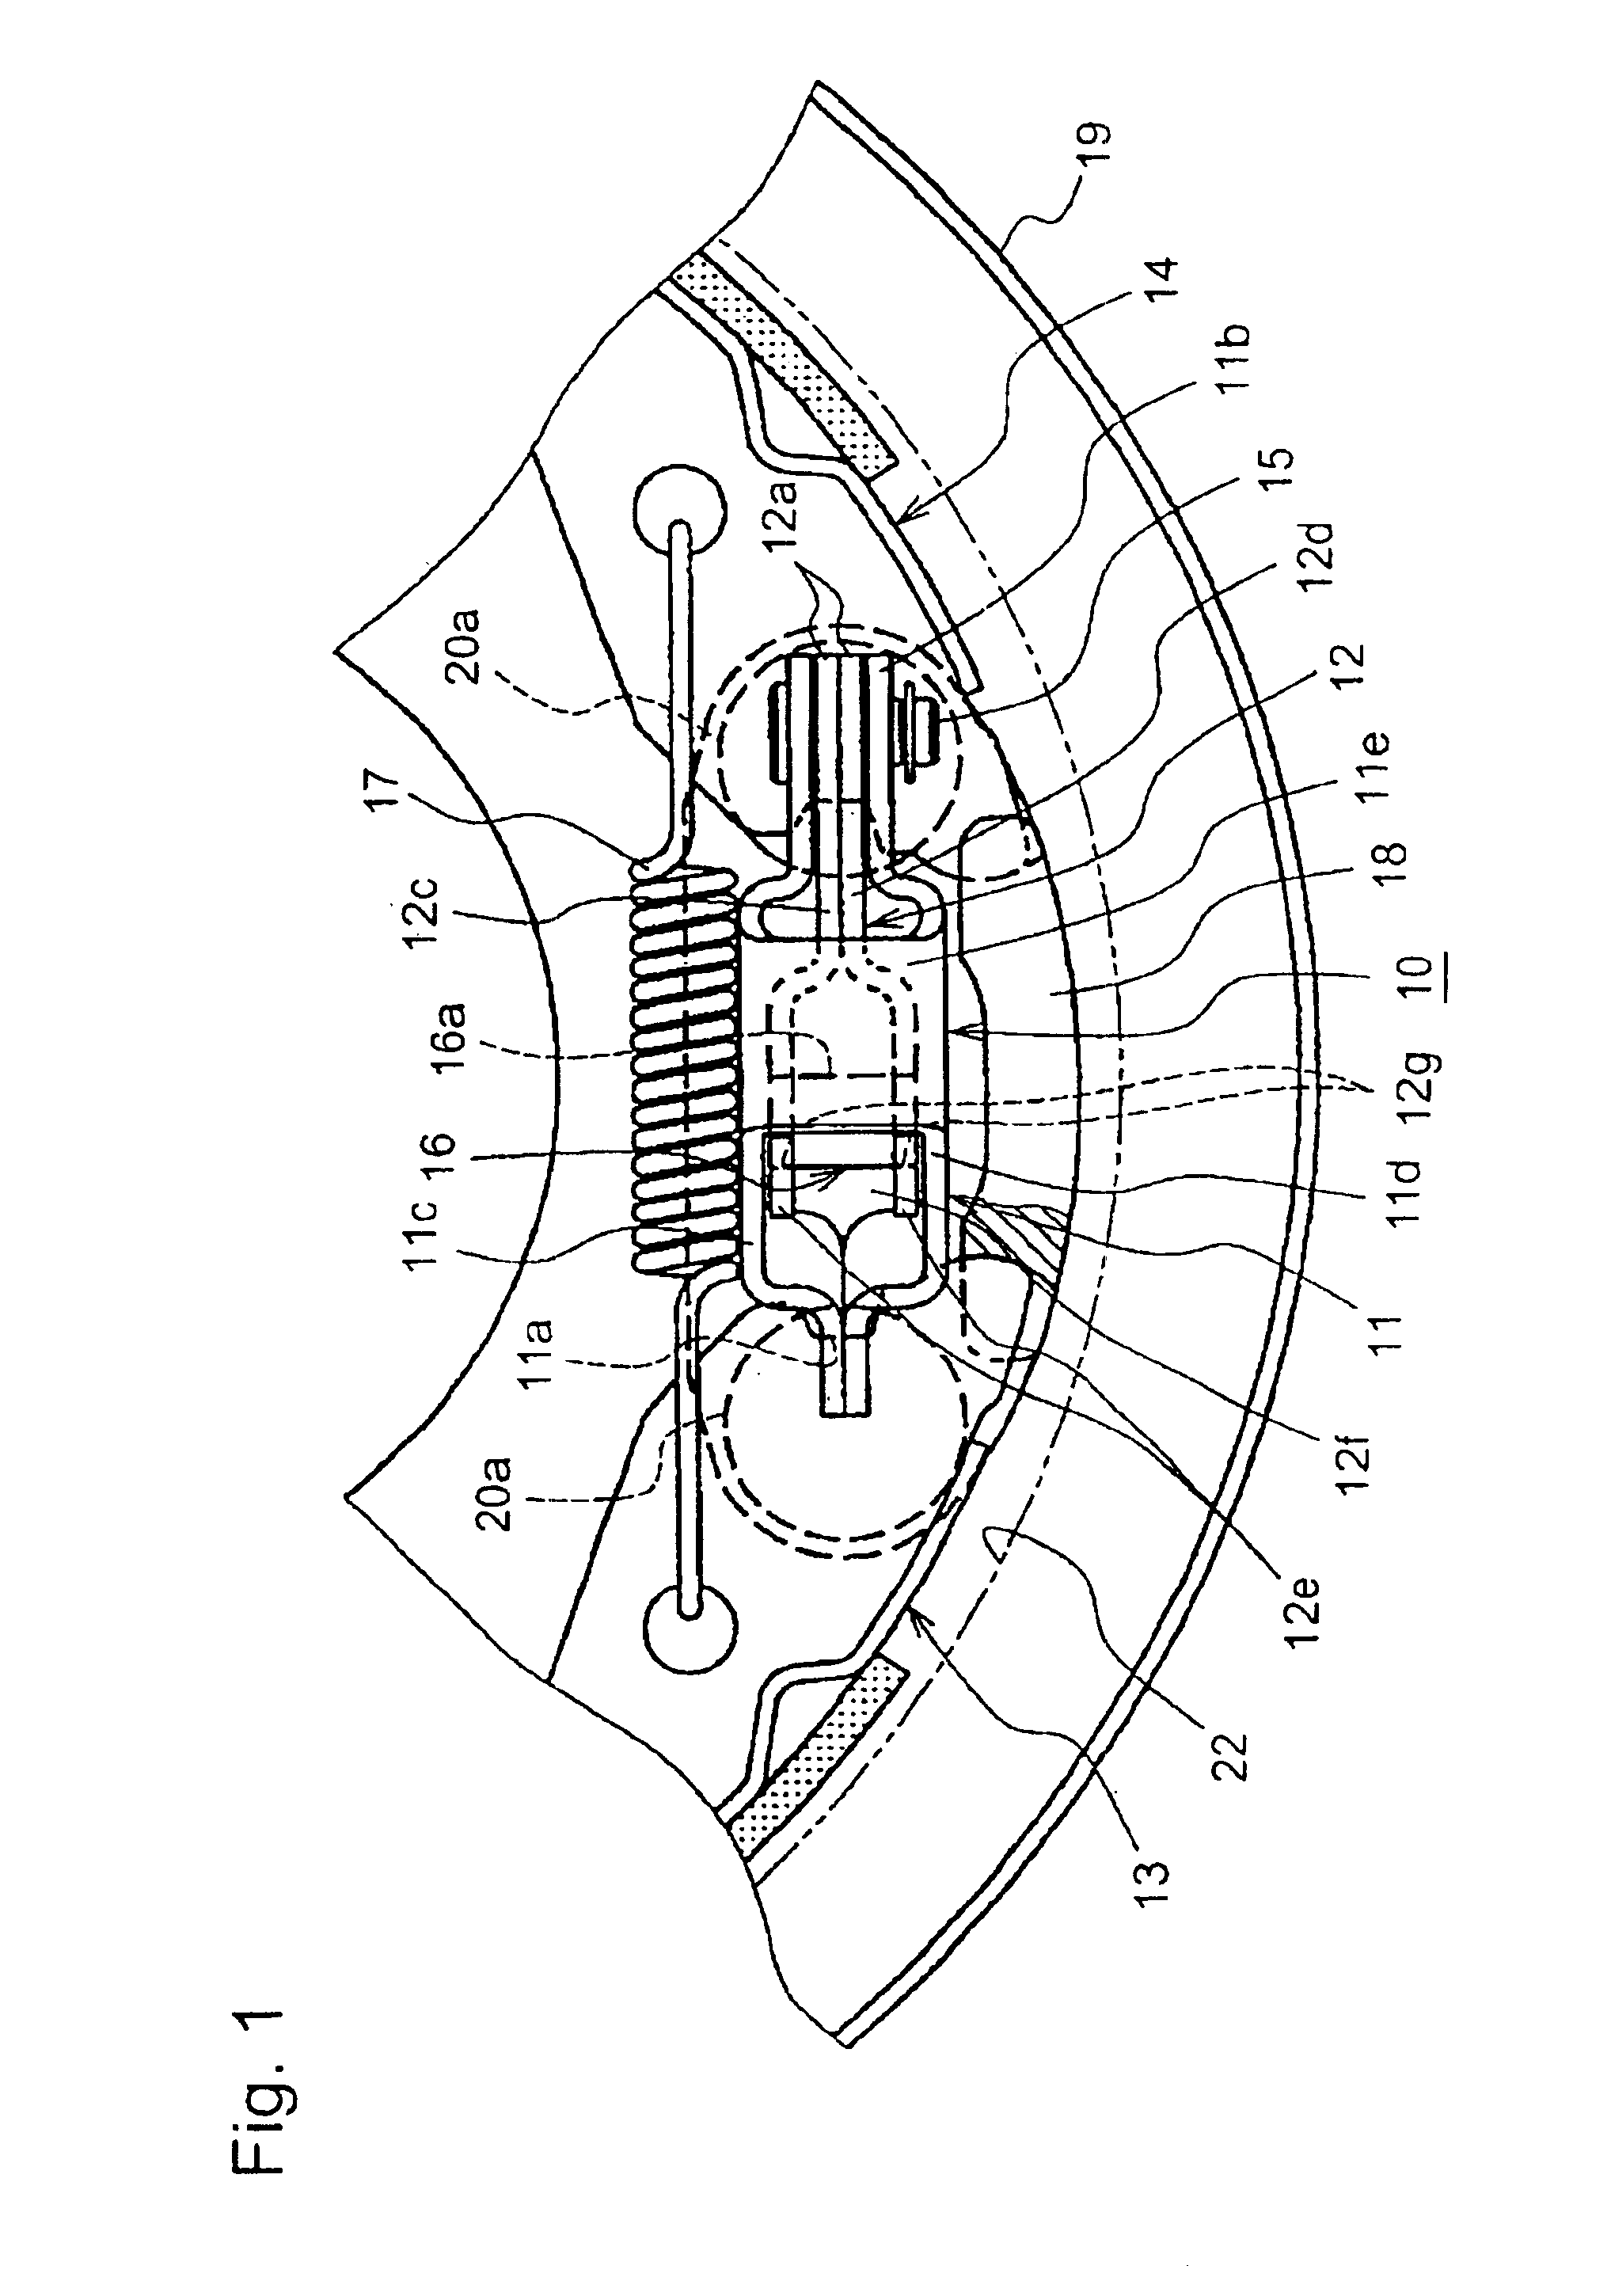 Brake cable connecting apparatus for drum brake